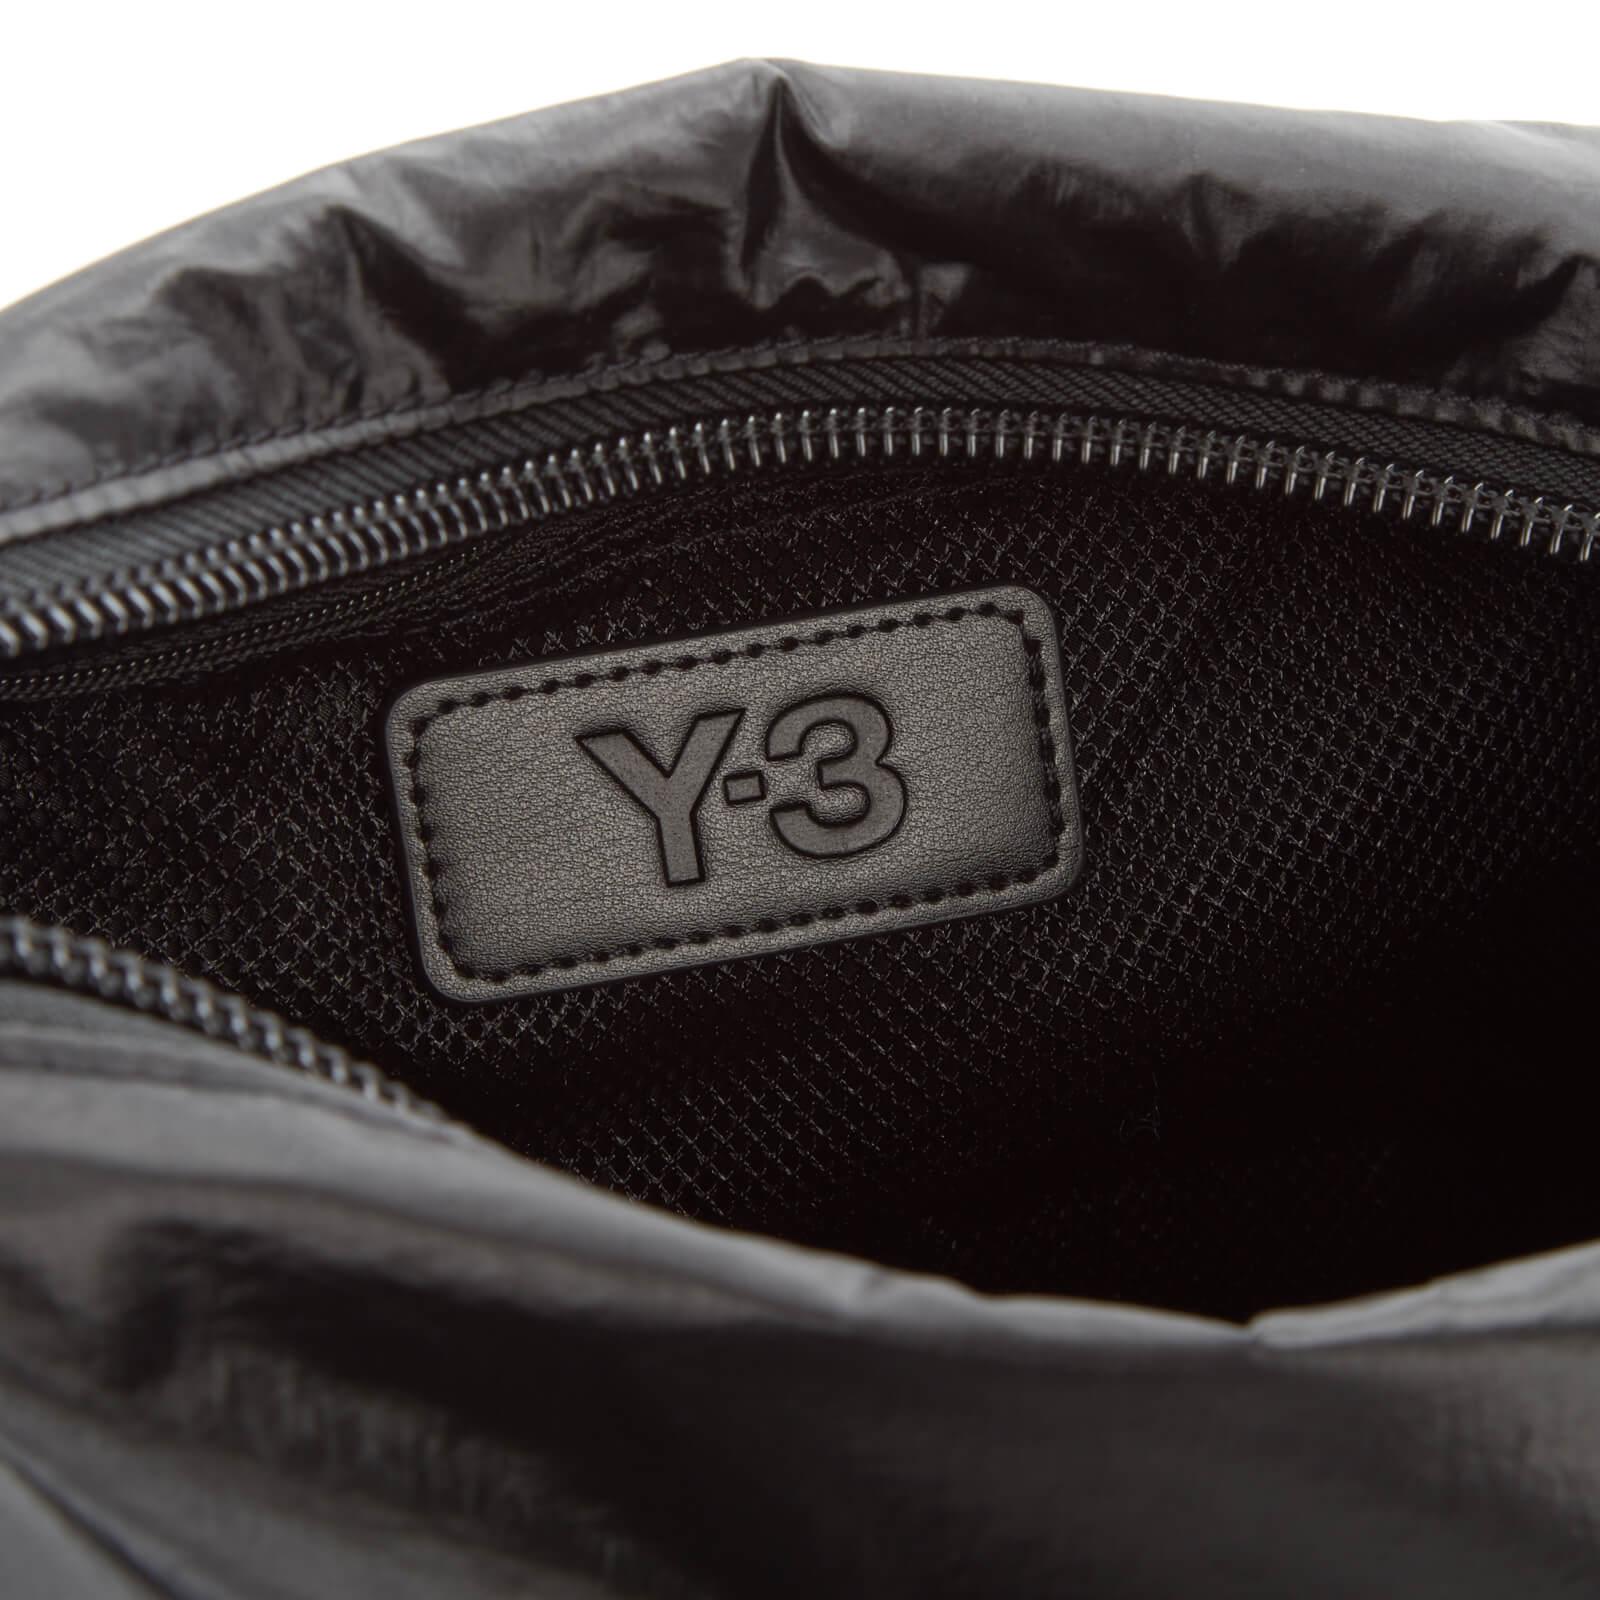 Buy Y-3 Gym Bags & Duffle bags online - 2 products